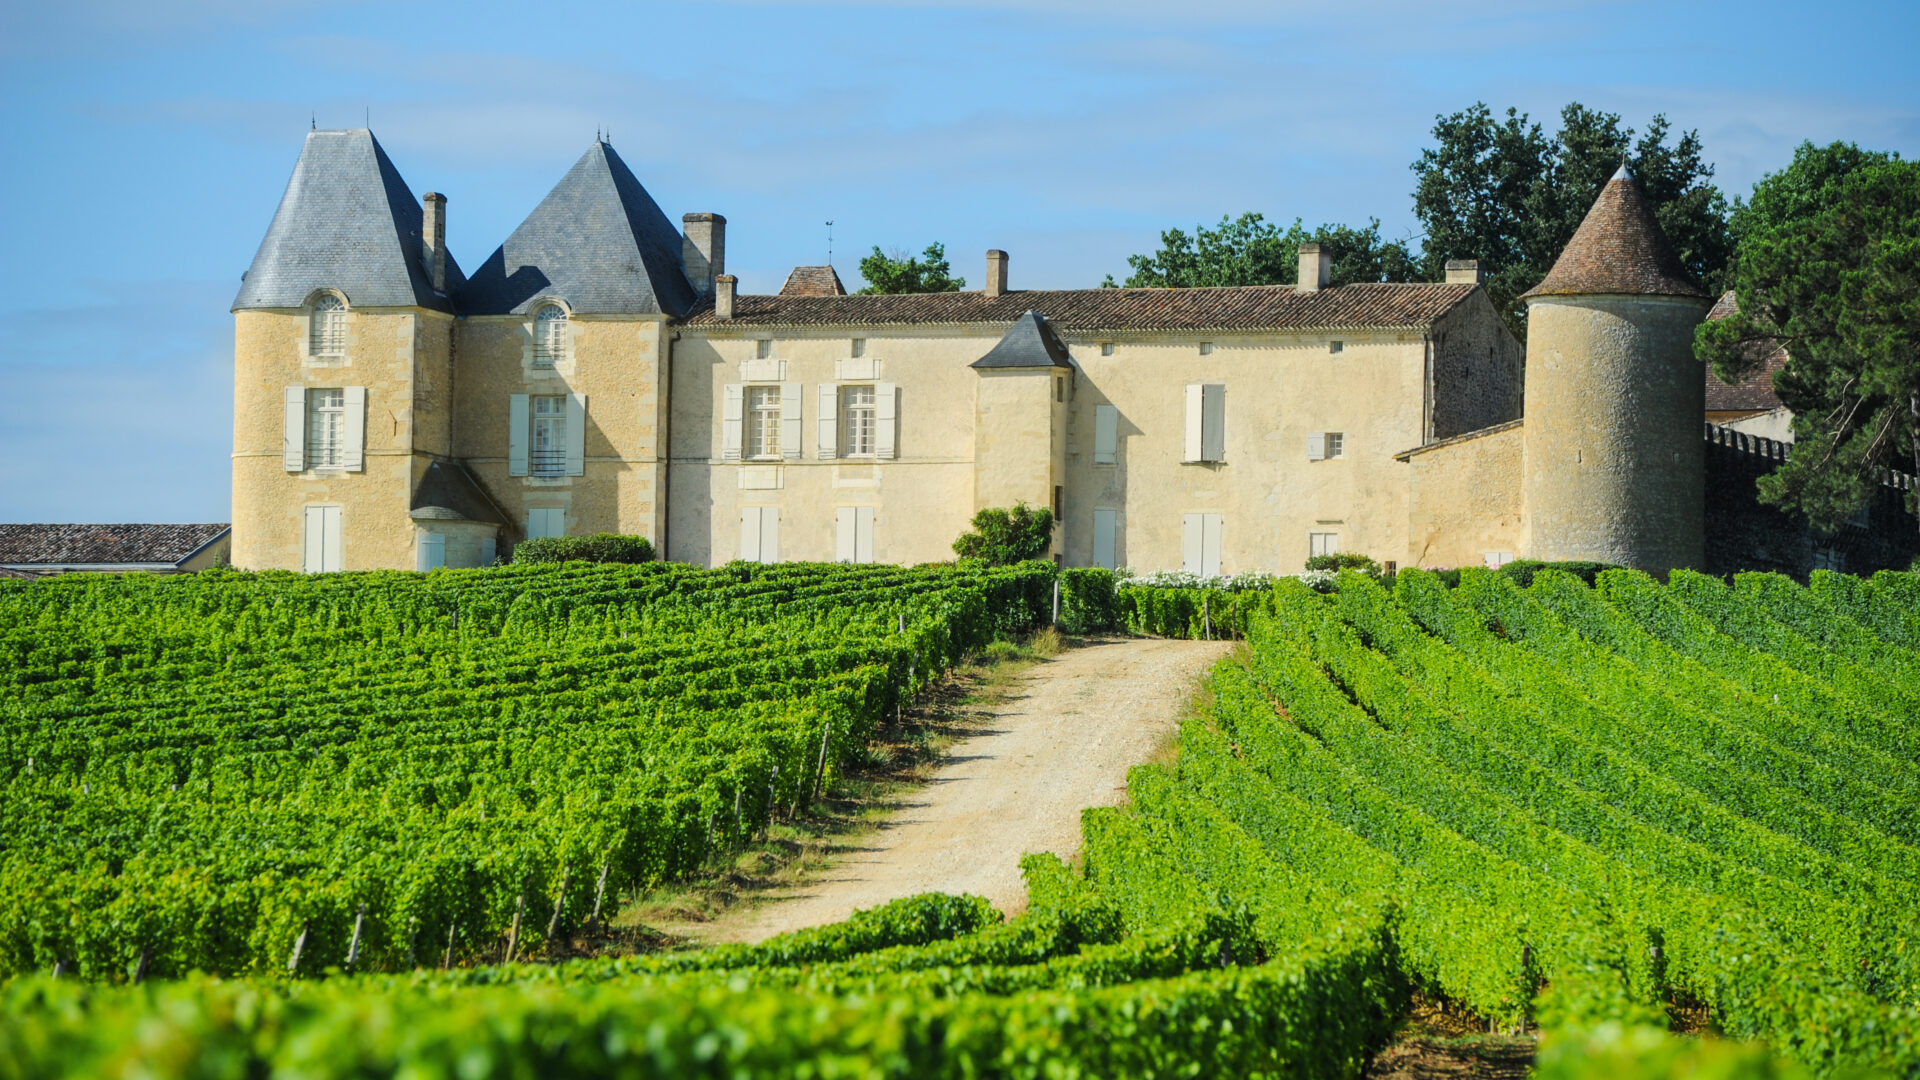 The Chateau d'Yquem and its vineyards in the Bordeaux wine area of Sauterne